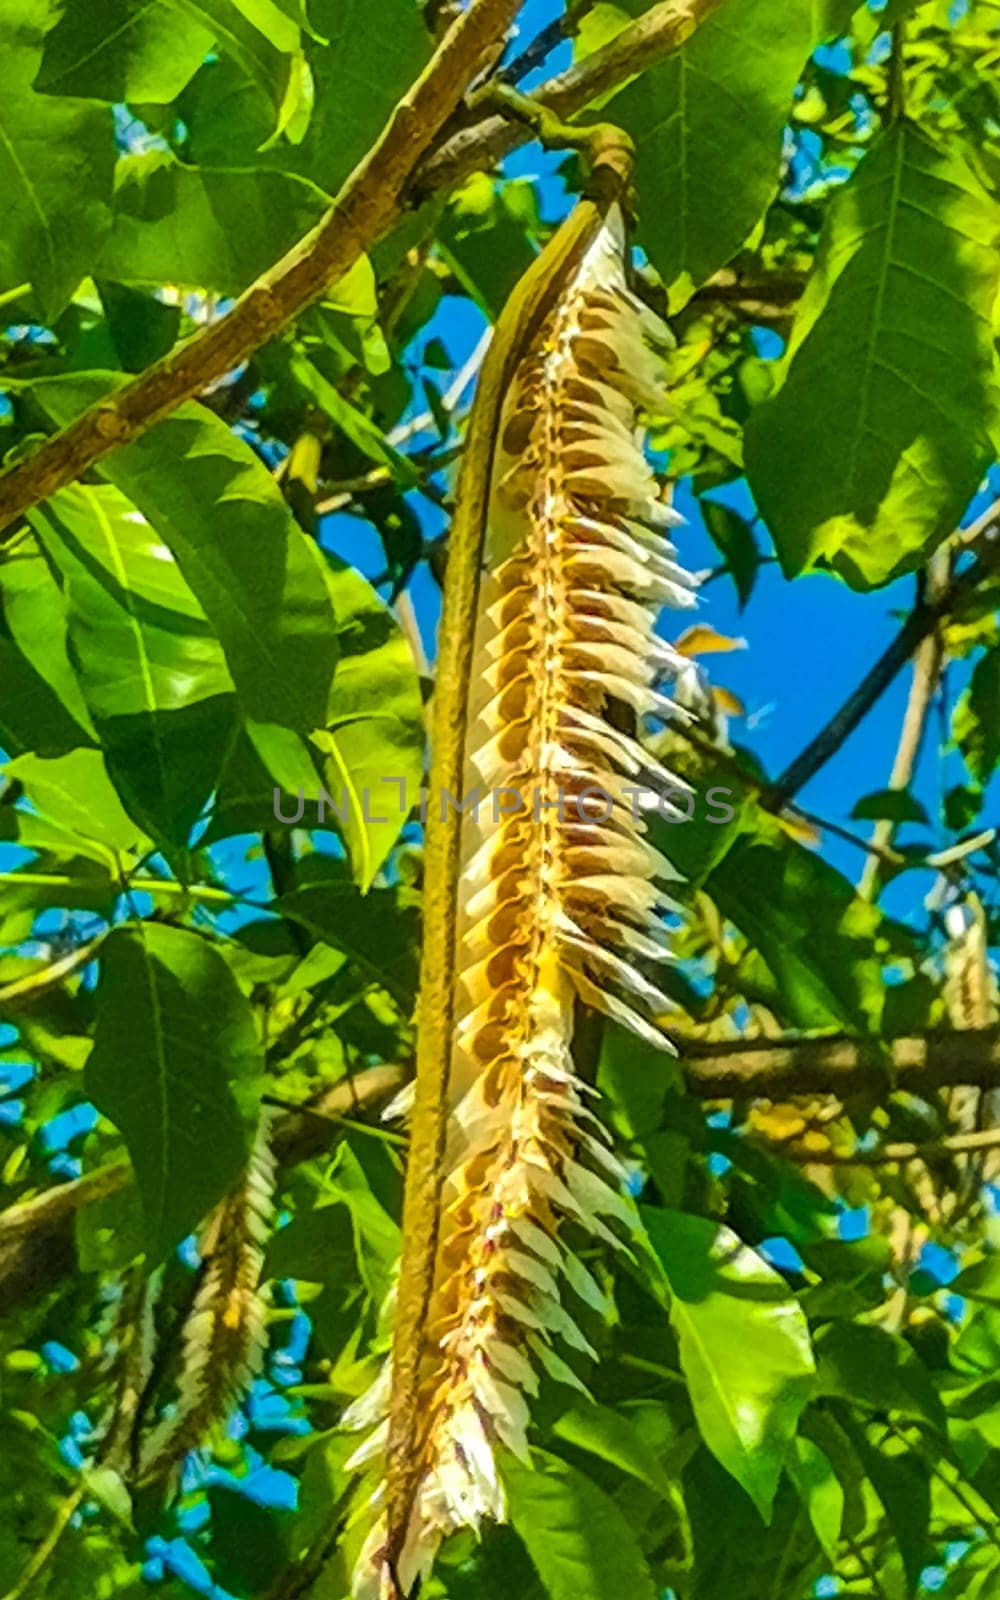 Tropical pods hanging from the tree Seeds in Zicatela Puerto Escondido Oaxaca Mexico.